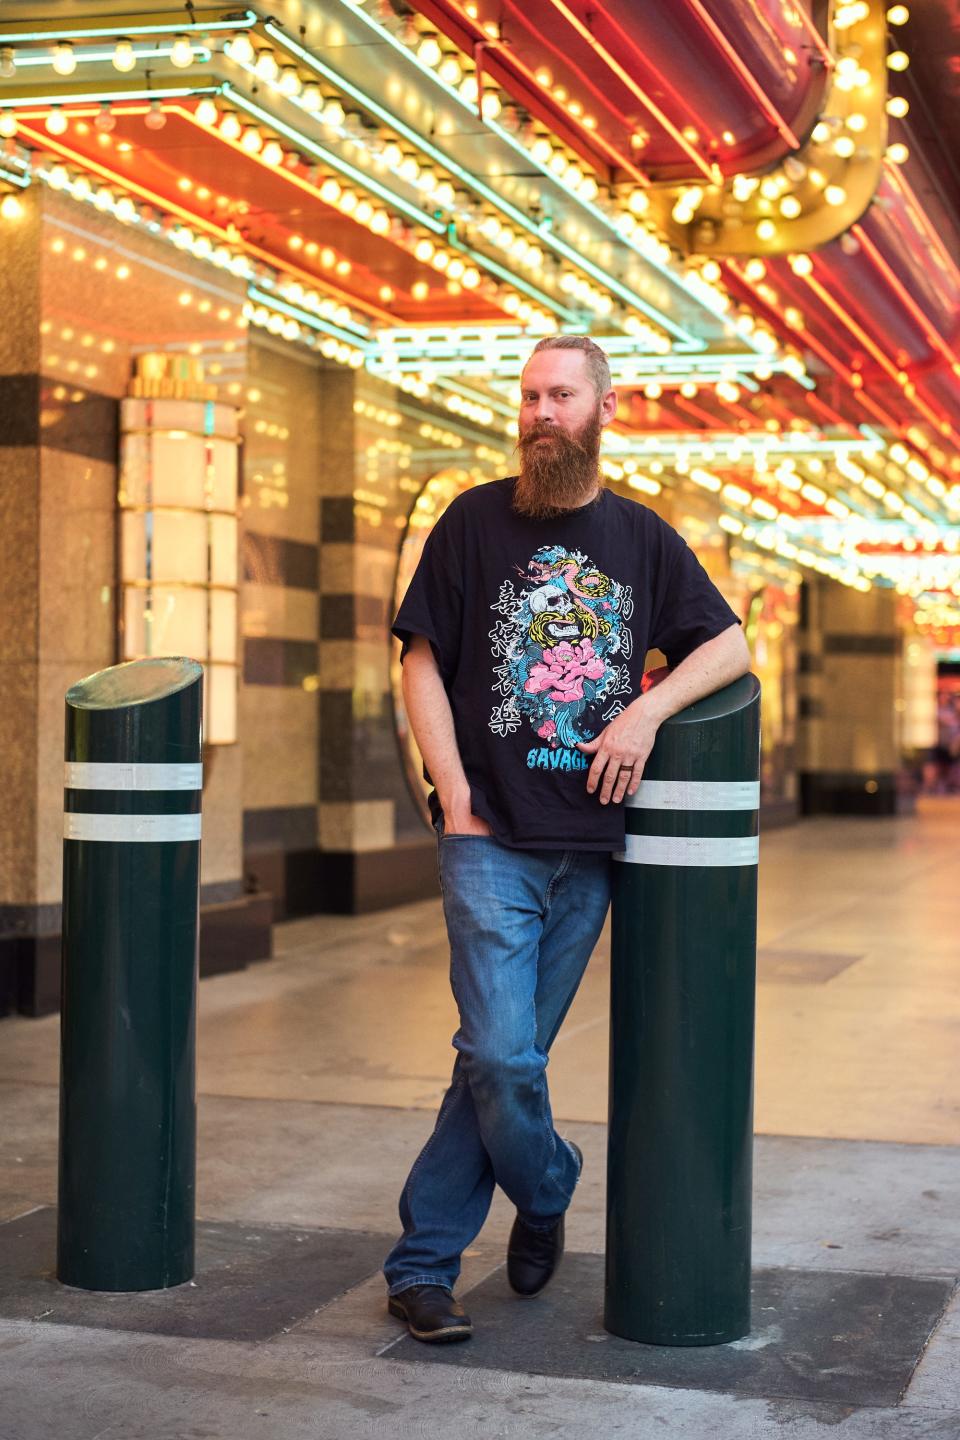 Daniel Westwood is a bartender at a Las Vegas bar.  Inflation is impacting service-sector workers as some consumers become stingier with tipping.